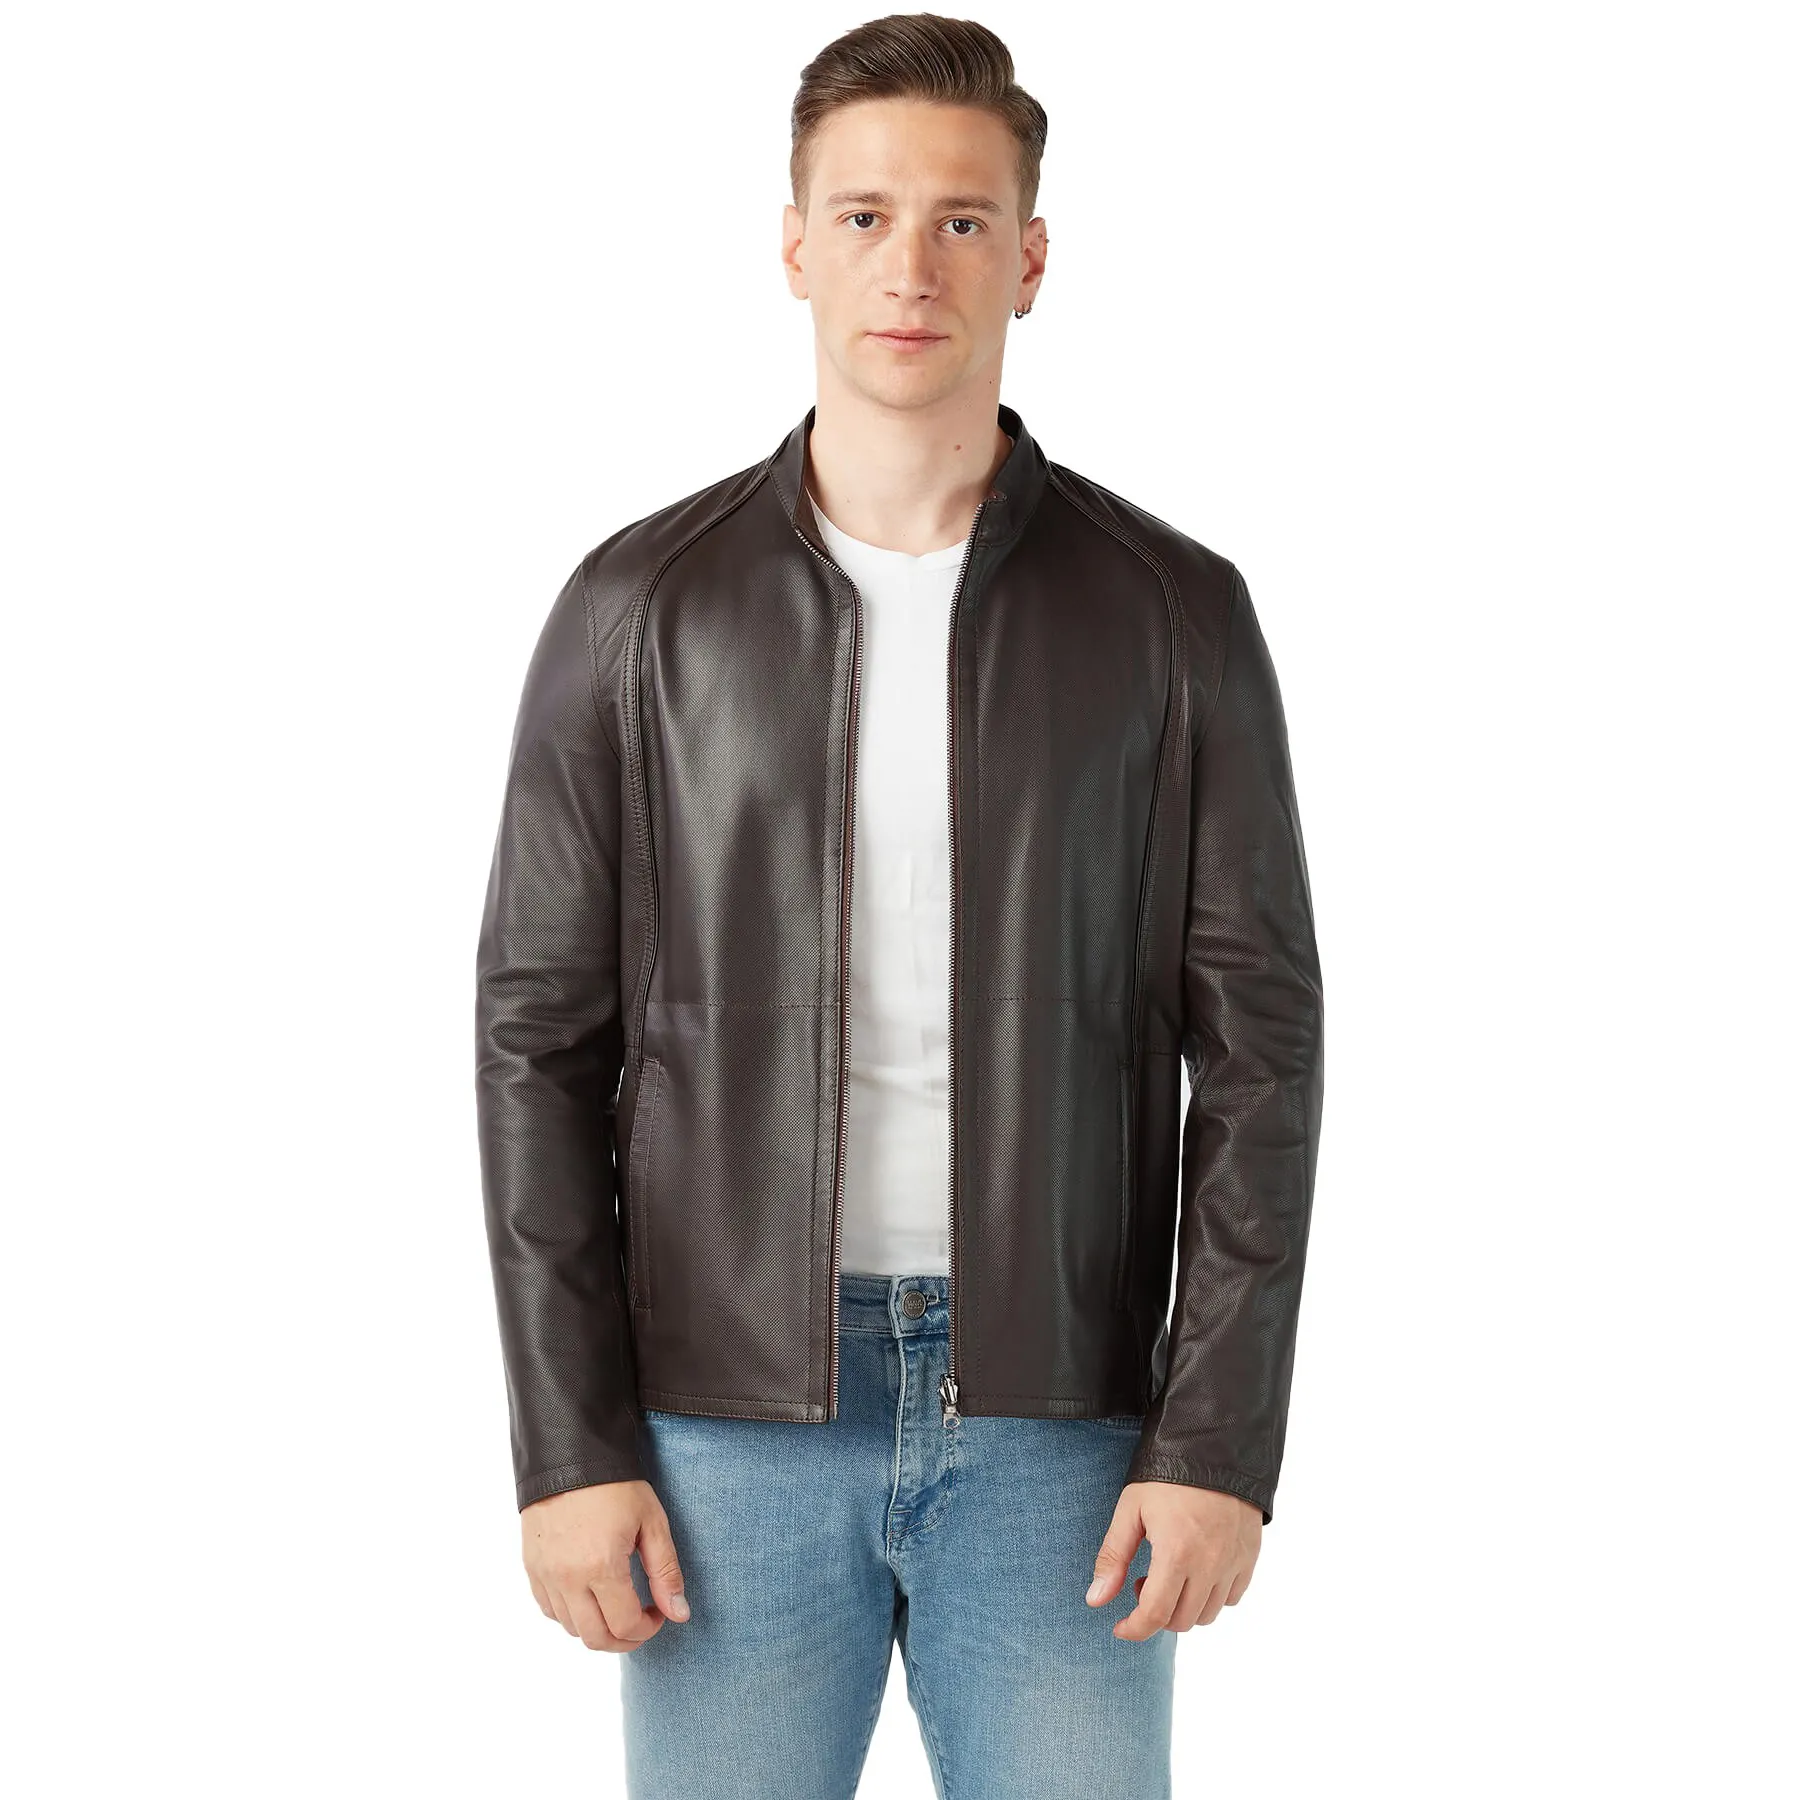 New Arrival Fashion Designs Boys Classic Leather Jacket Men Genuine Leather Jacket High Quality Pure Leather Jacket